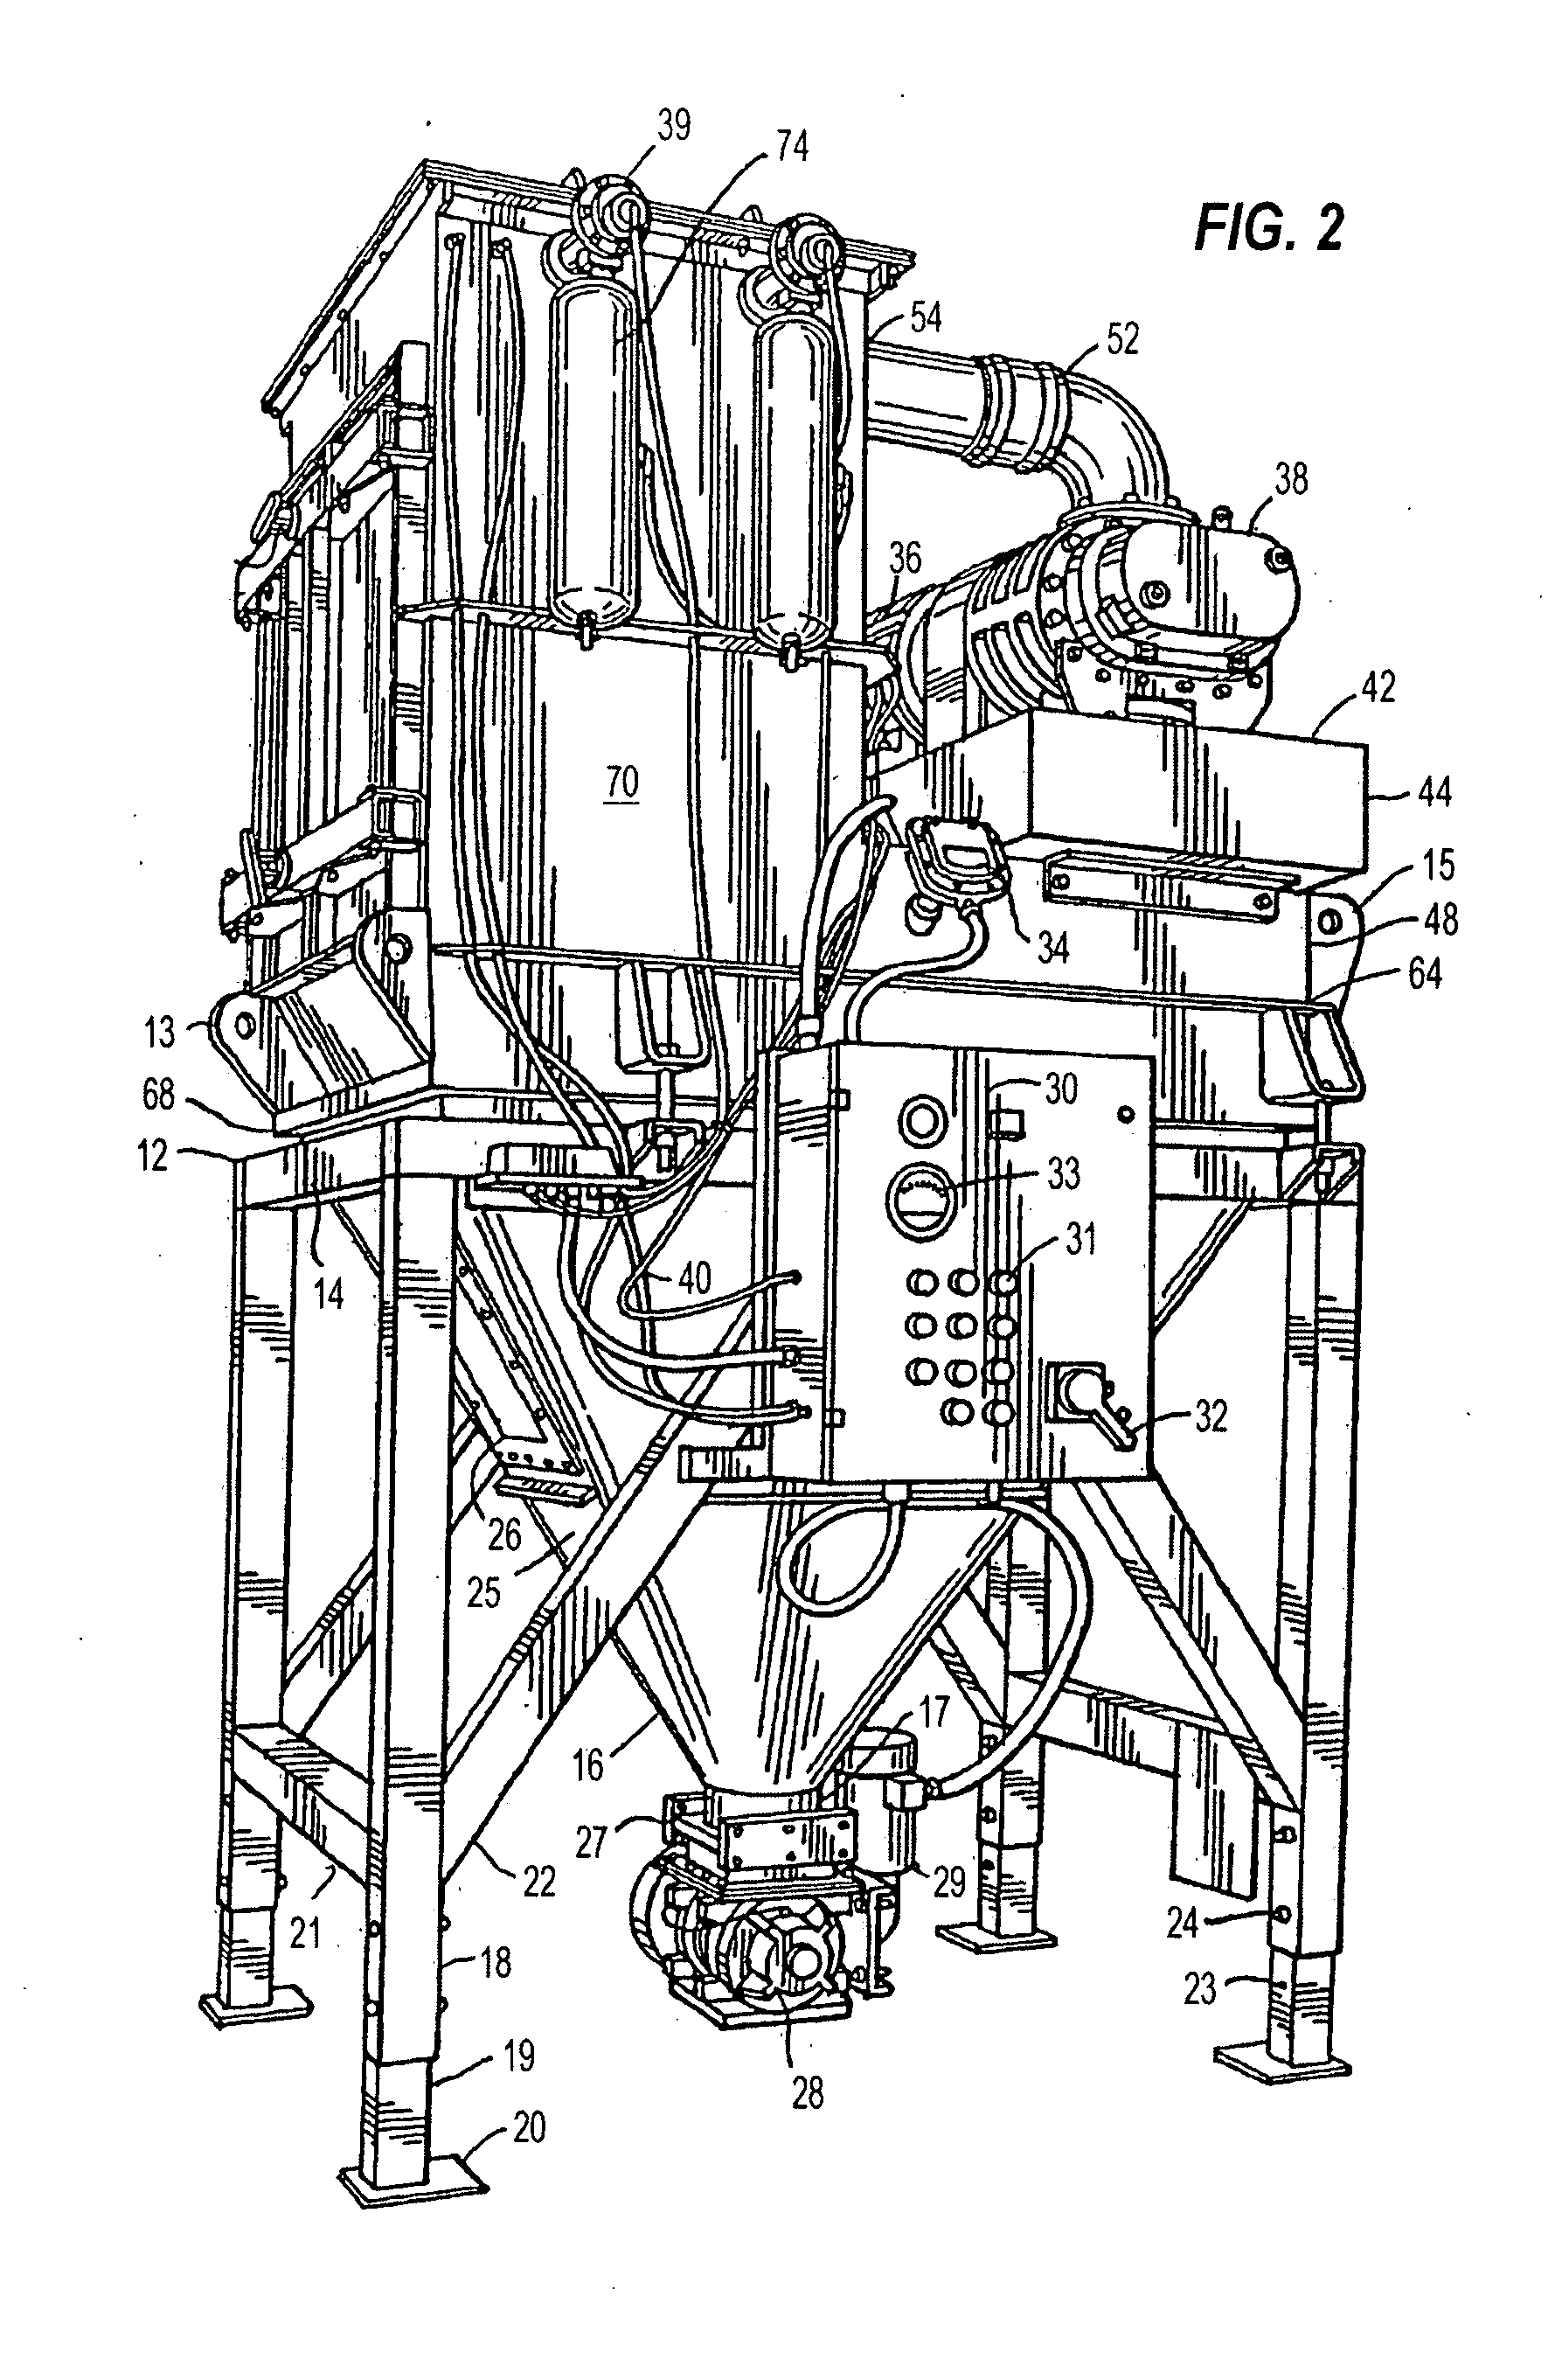 Vacuum loader with louvered tangential cyclone separator